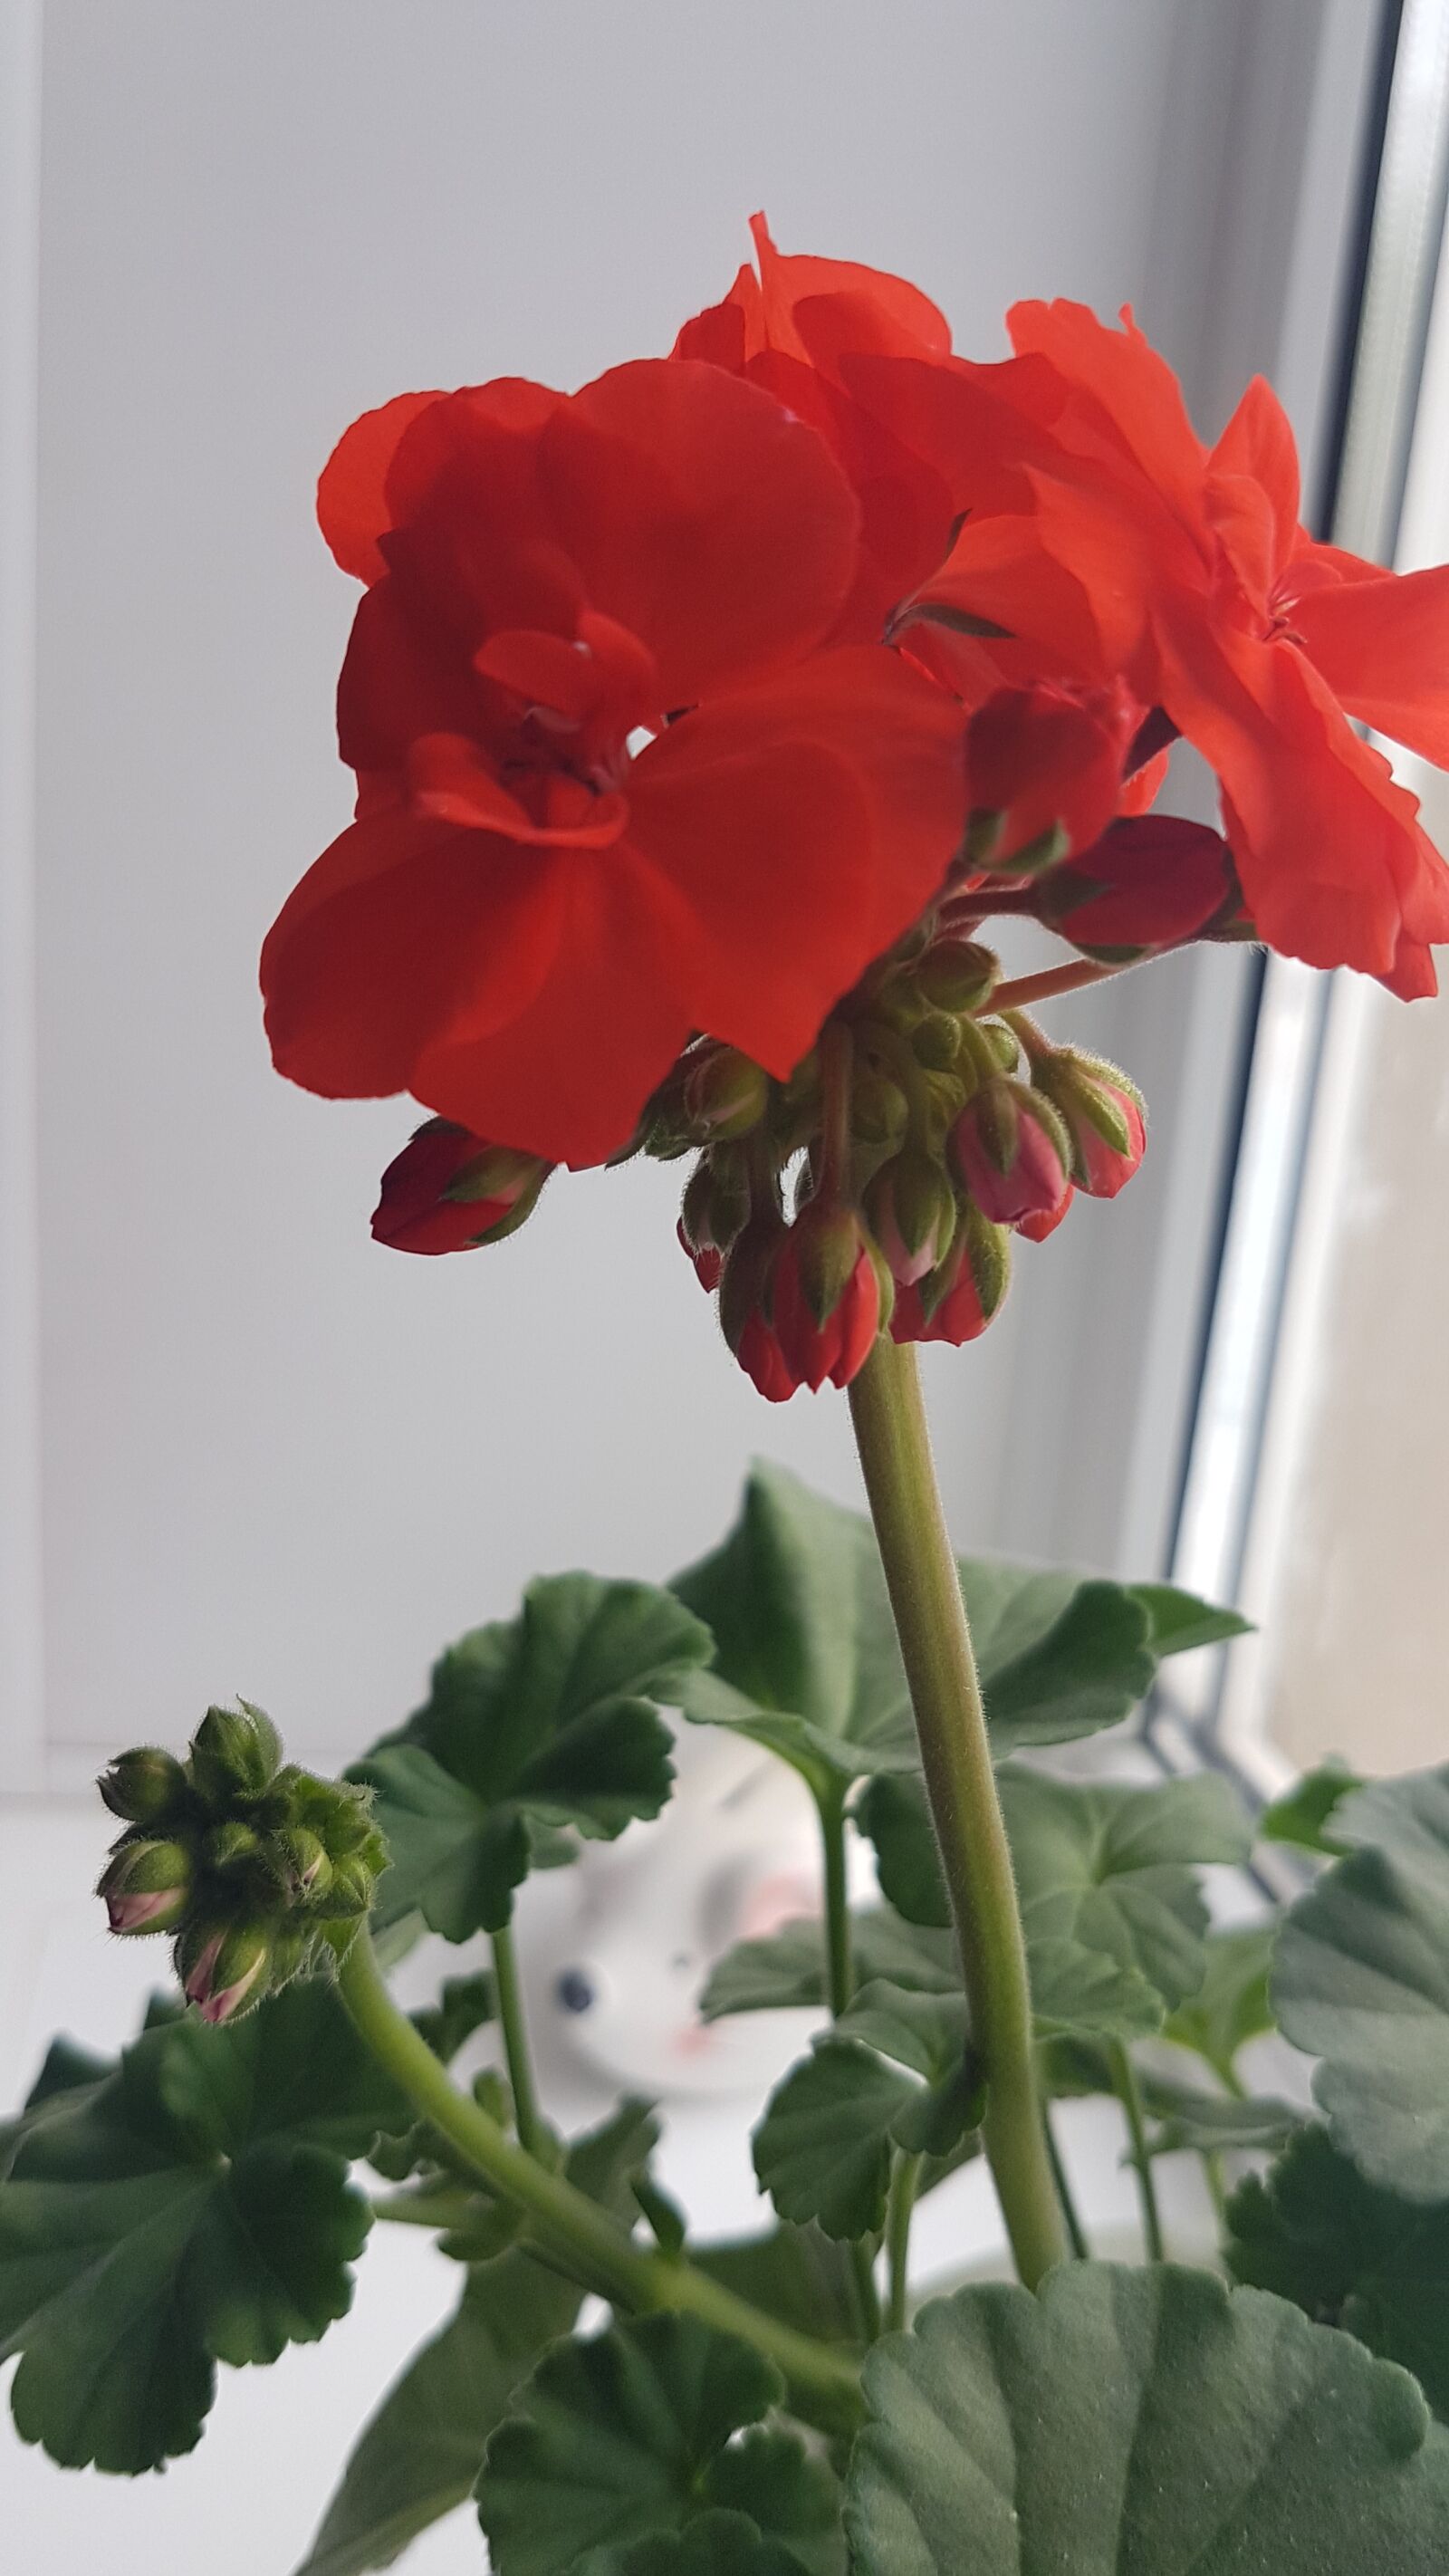 Samsung Galaxy S7 sample photo. Red flower, plant, flower photography